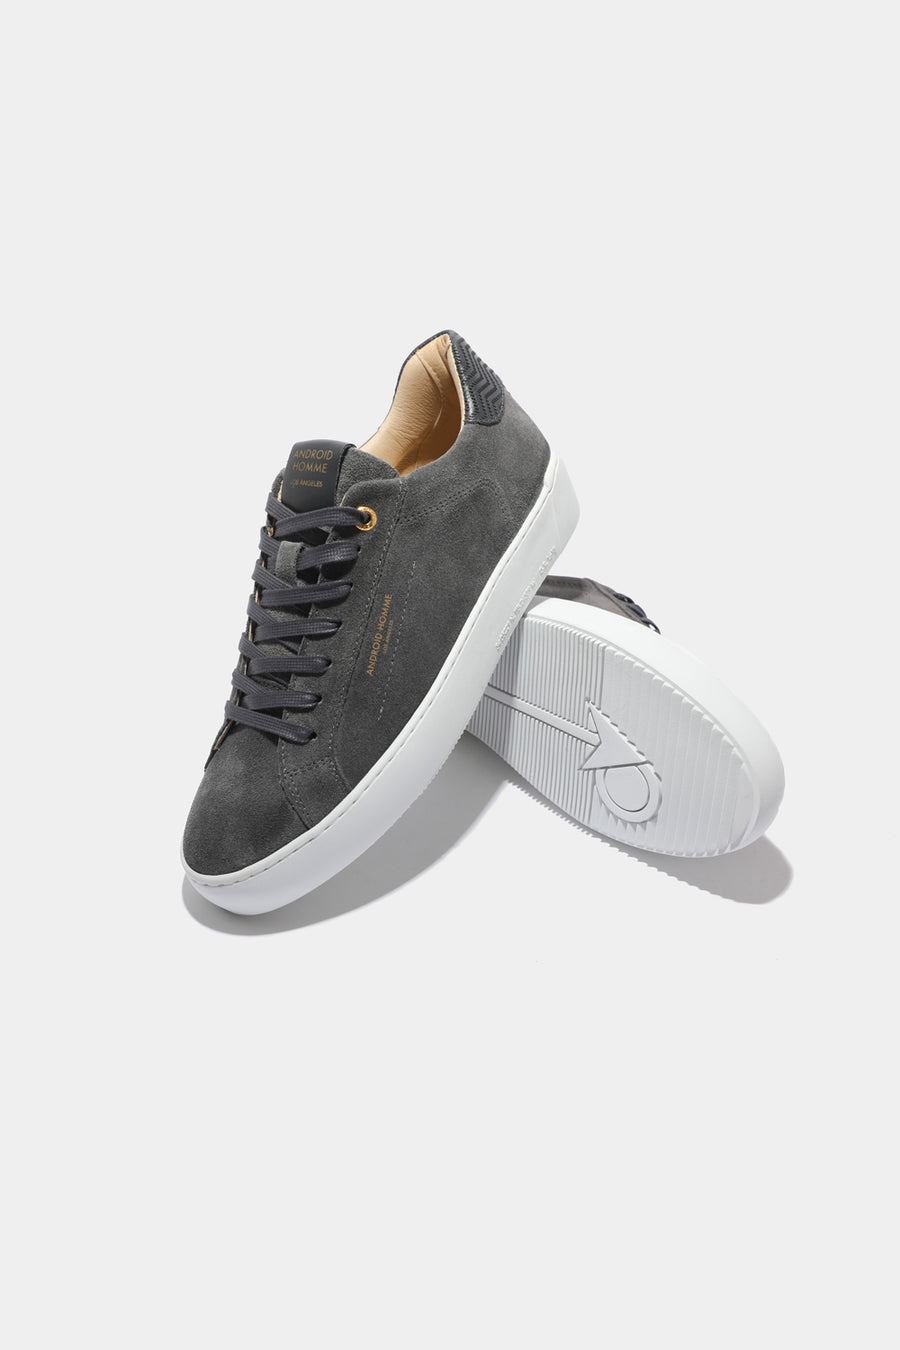 Buy the Android Homme Zuma Grey Suede Zig Zag Leather Sneaker at Intro. Spend £50 for free UK delivery. Official stockists. We ship worldwide.